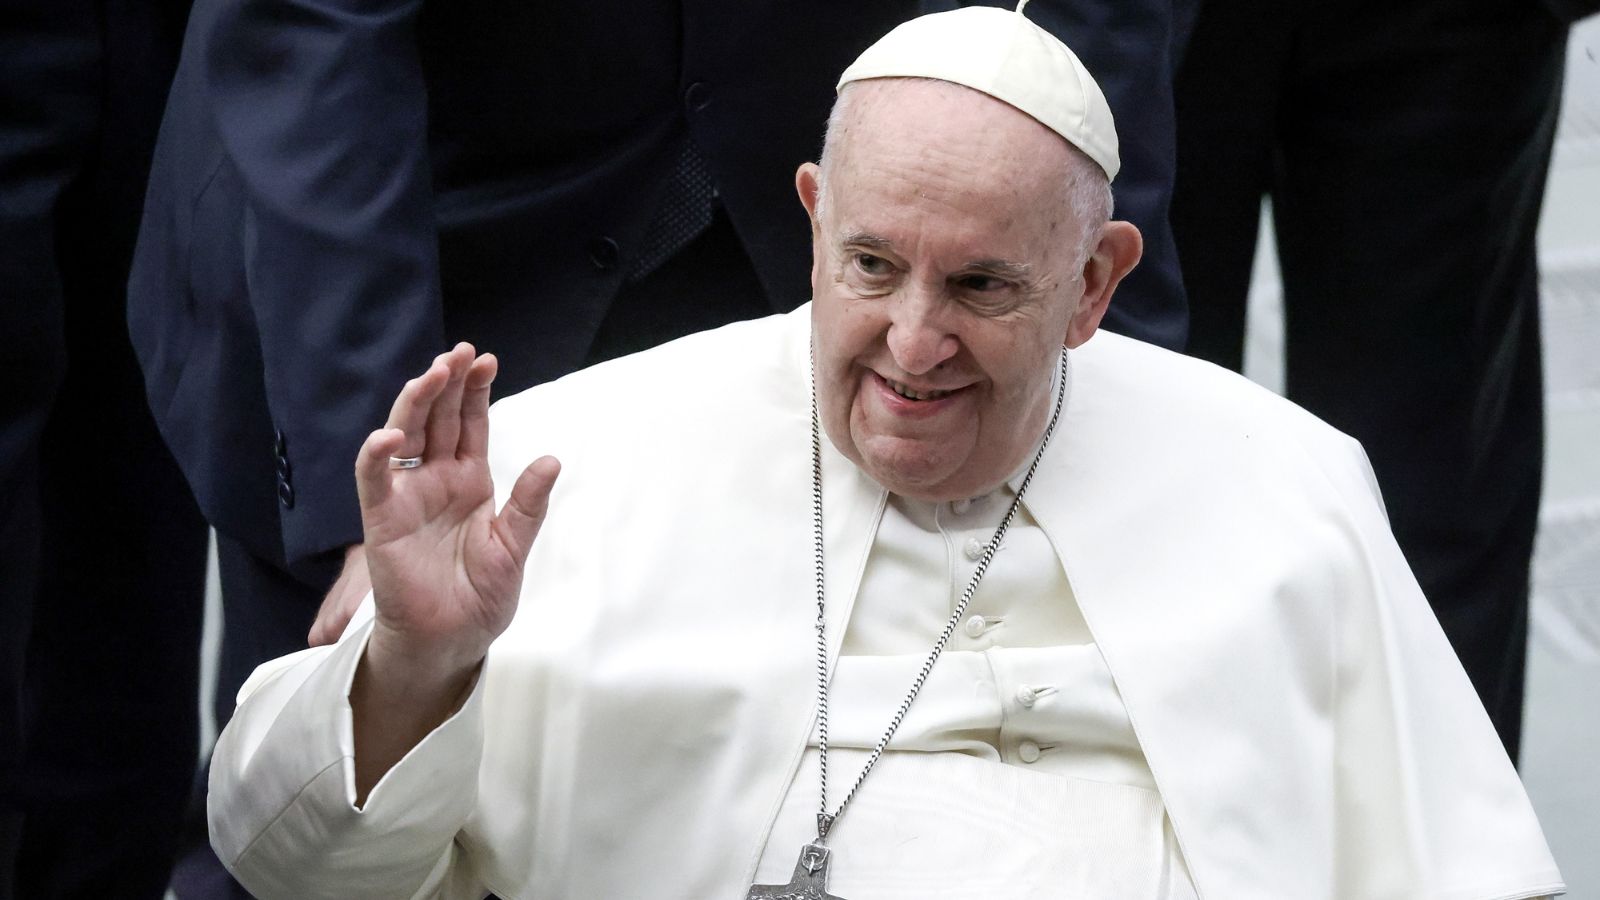 “Christianity in America Is Just a Money Making Scheme”: Pope Slams American Catholics for Turning Faith into a Cash Cow and Ideological Circus